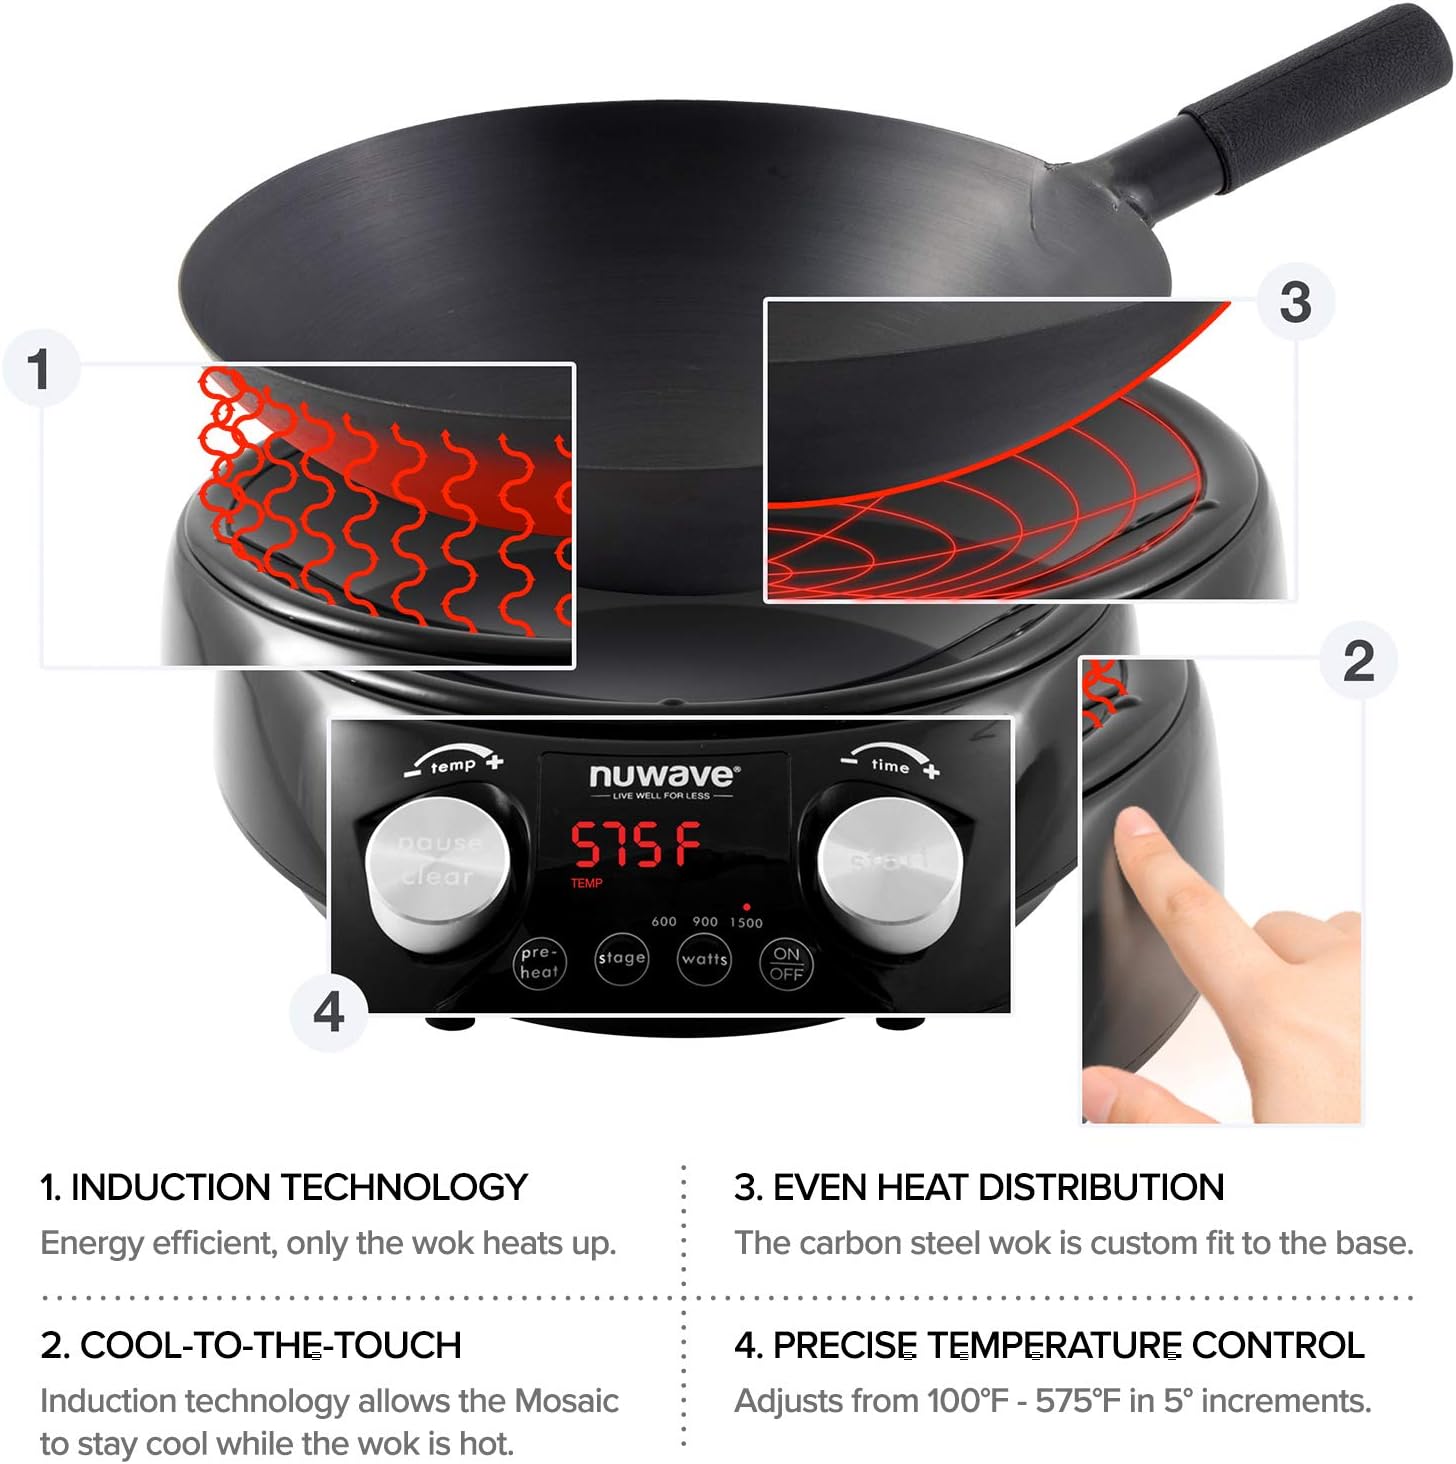 NuWave 10 inch Designs-Non-Stick Fry Pan, Even-Heating Technology